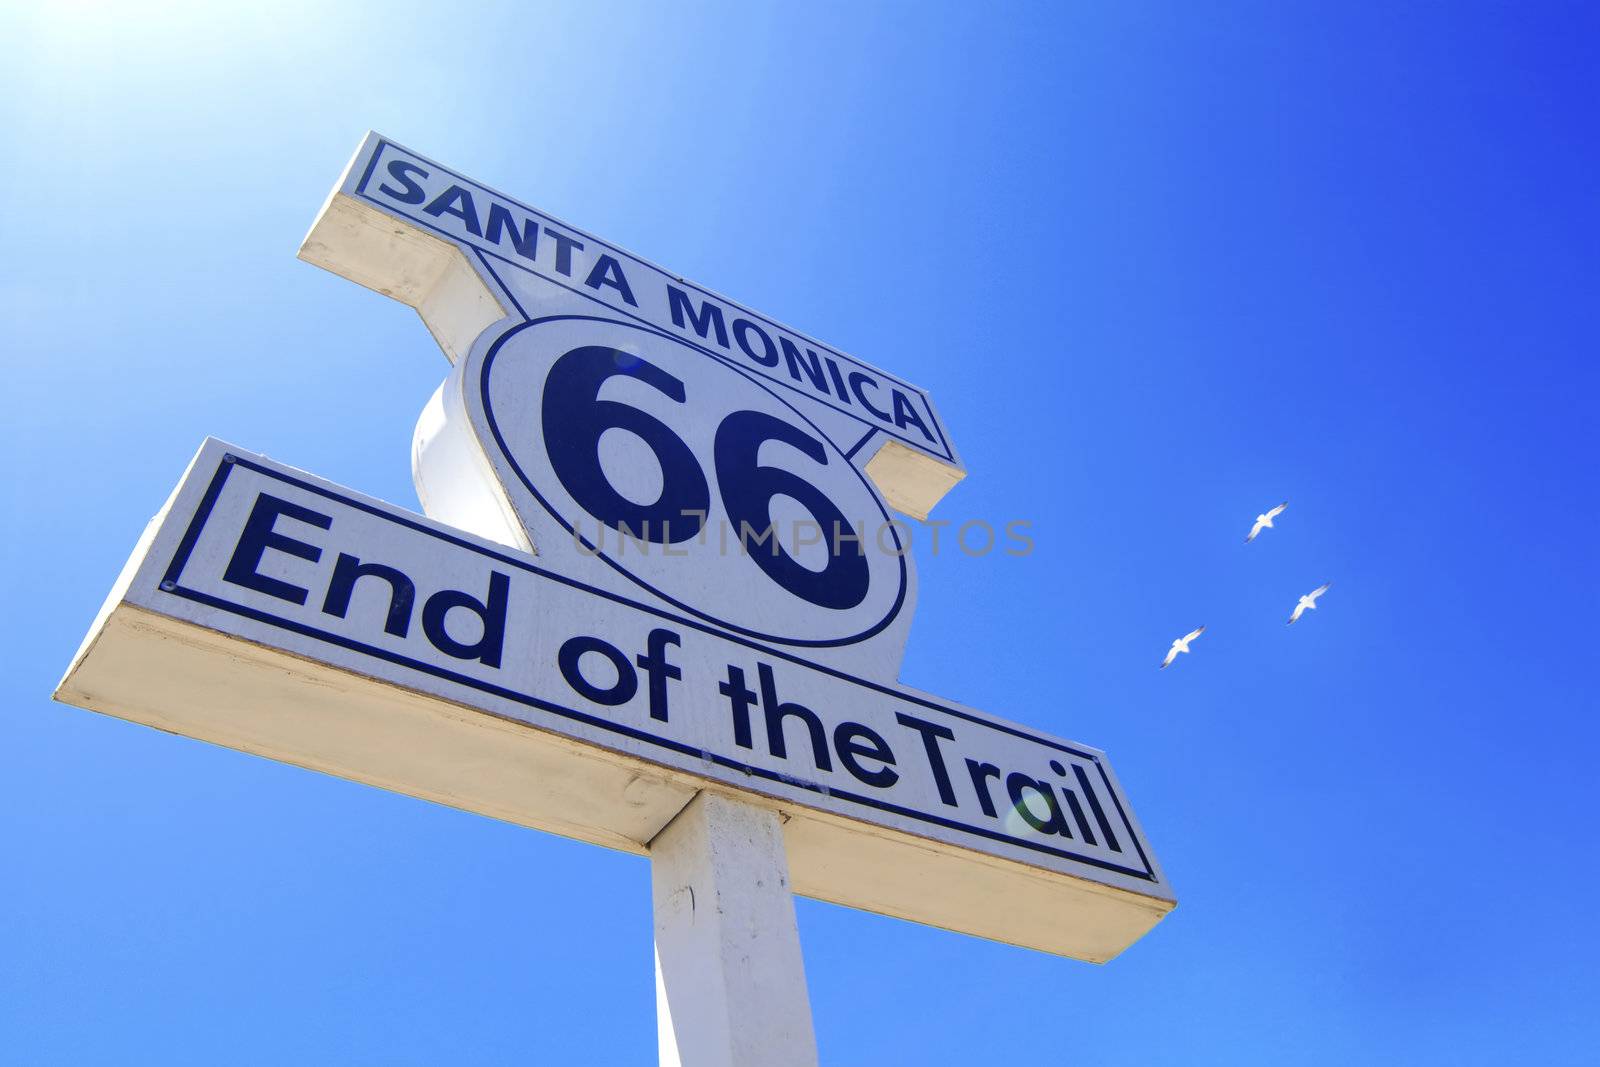 End of the trail sign in Santa Monica, route 66